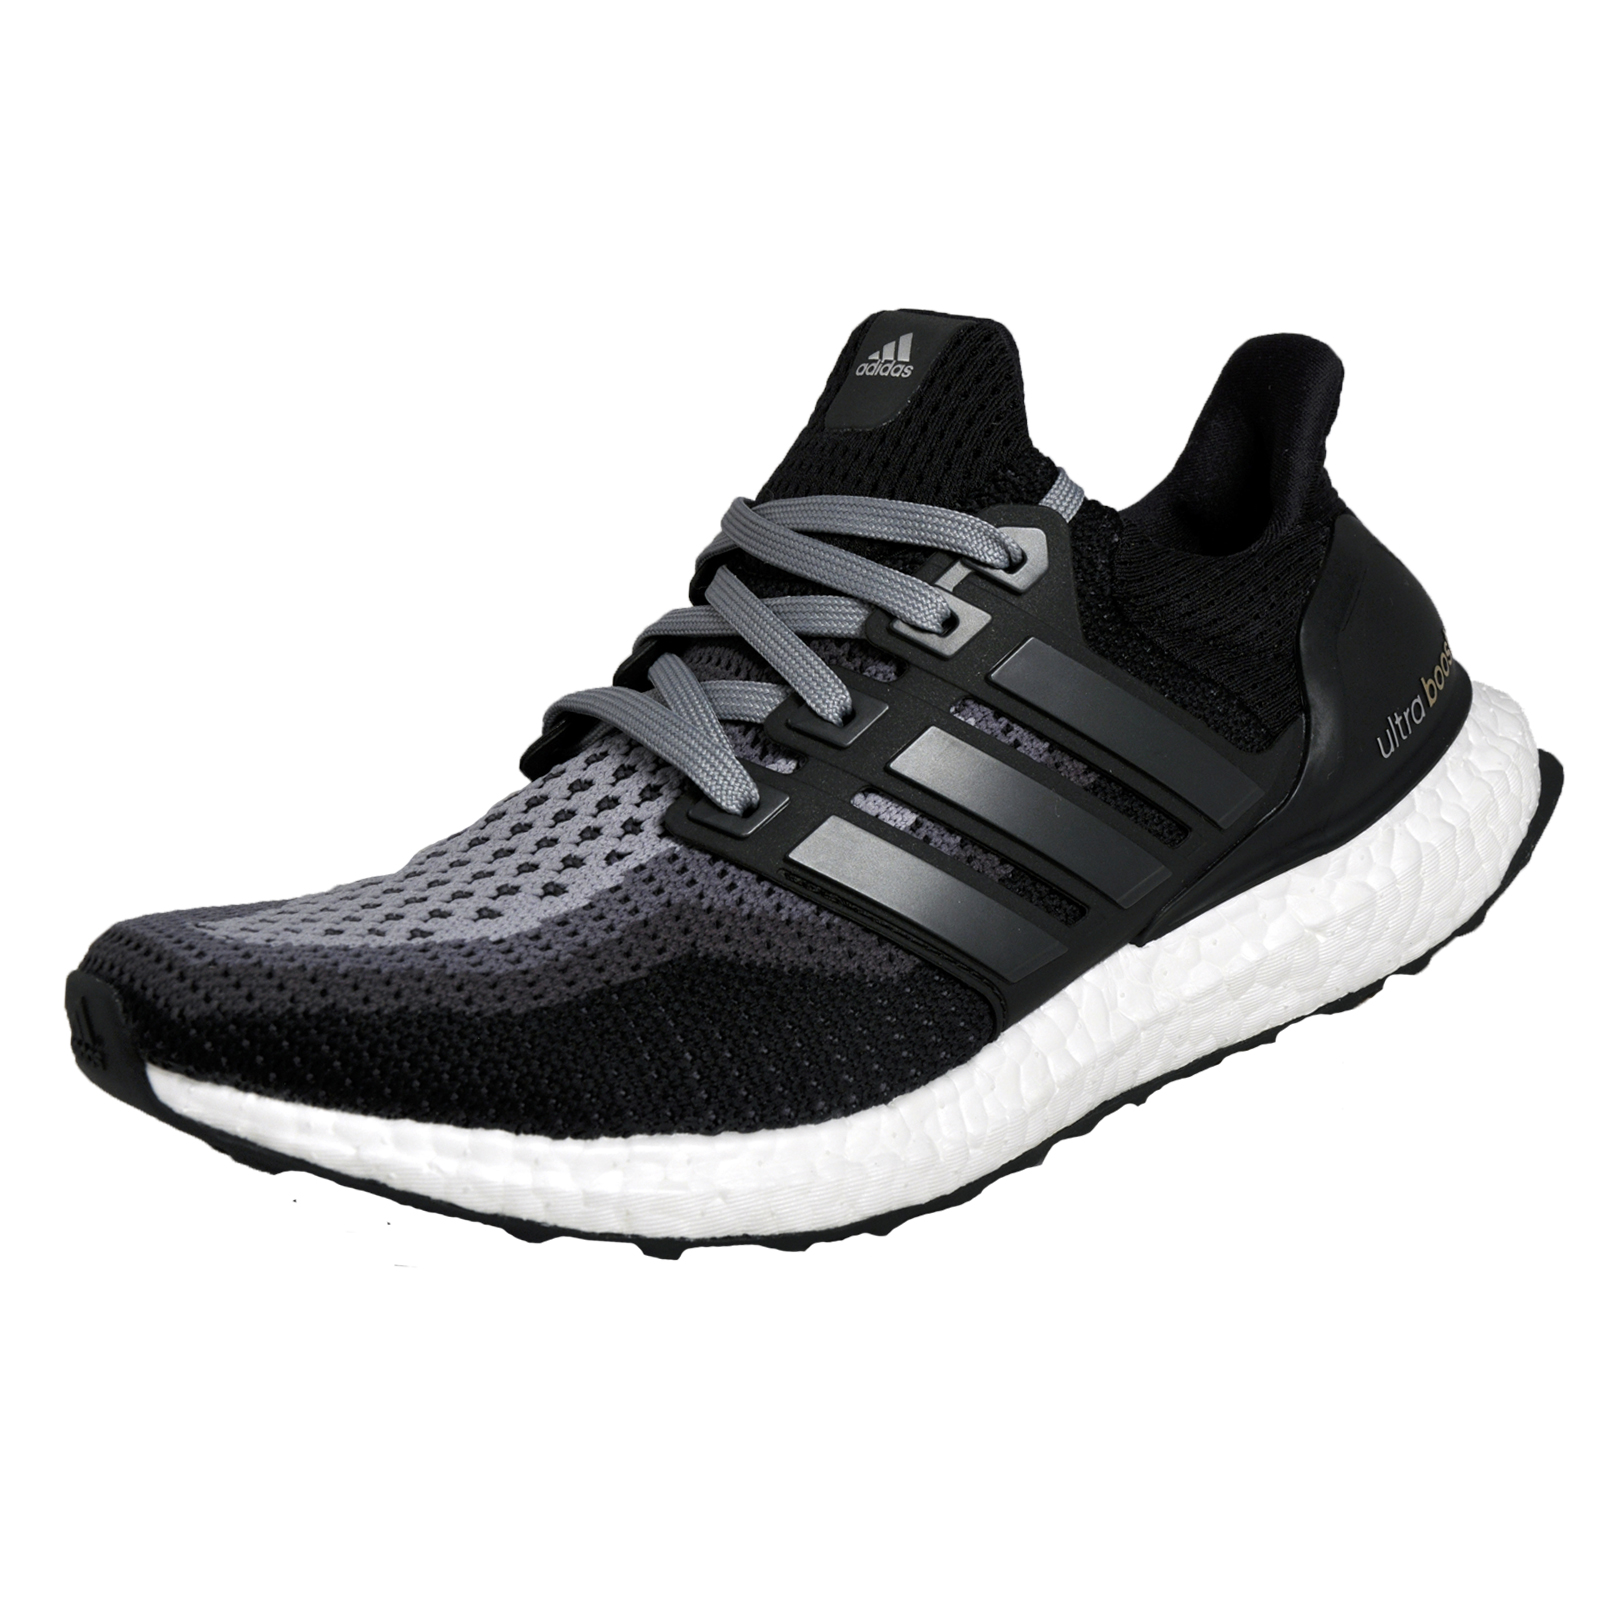 Adidas Ultra Boost Primeknit Mens Running Shoes Fitness Gym Trainers Black